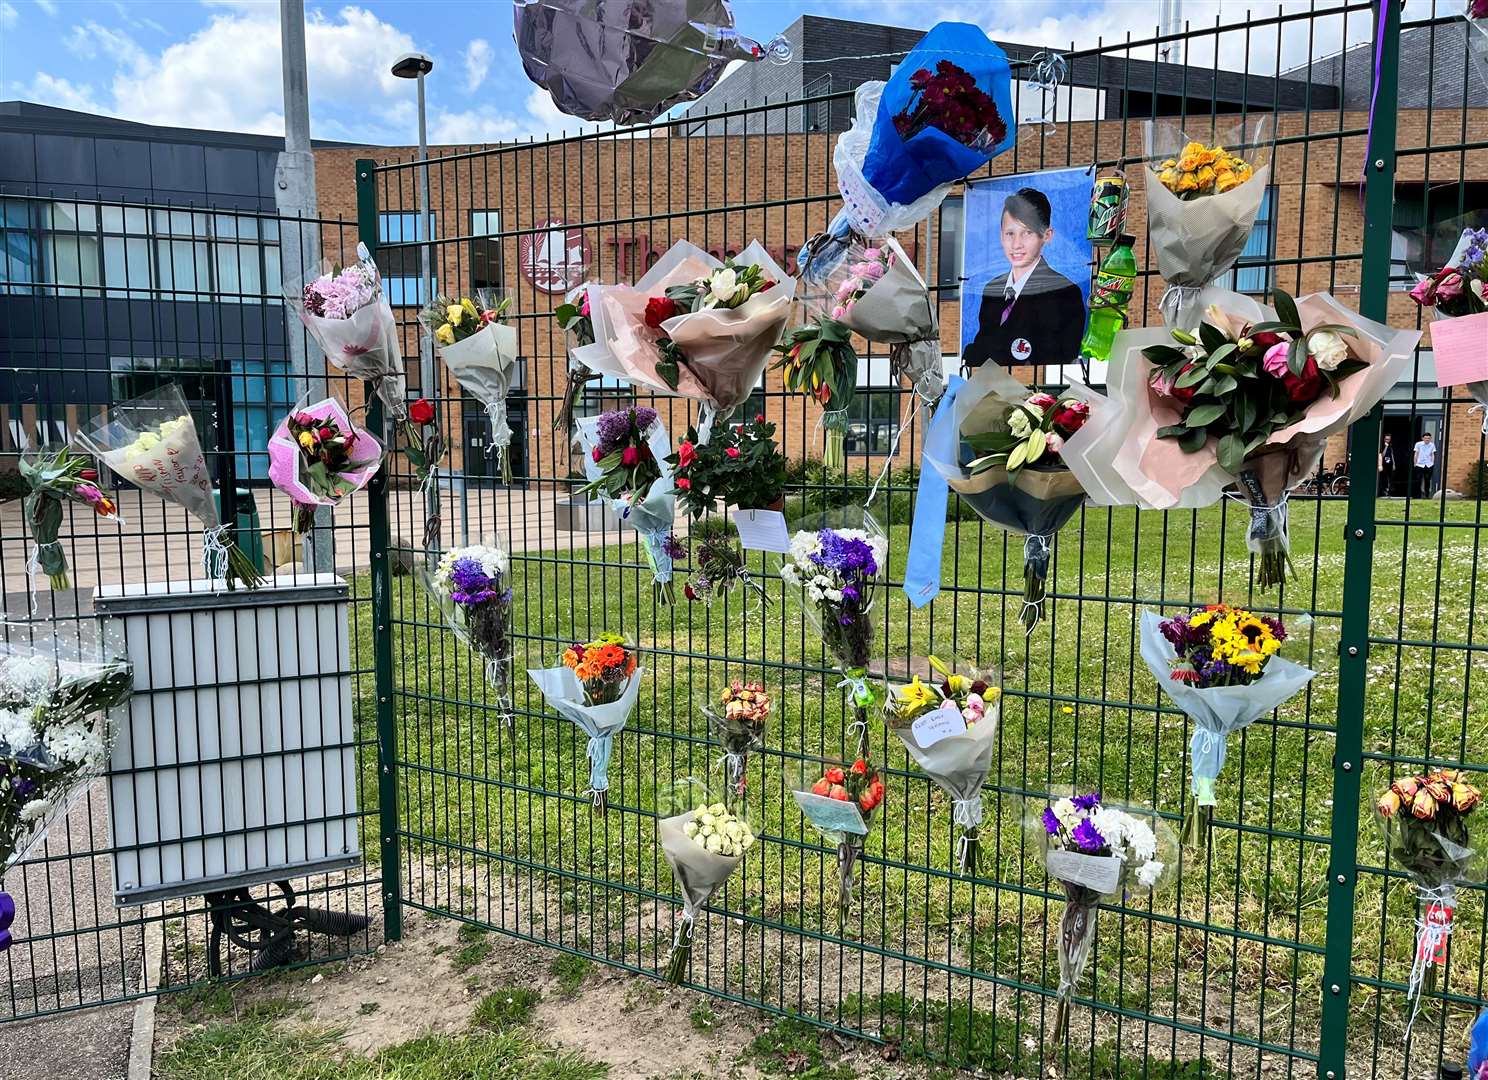 Just some of the tributes for Tristan Taylor left at Thamesview School